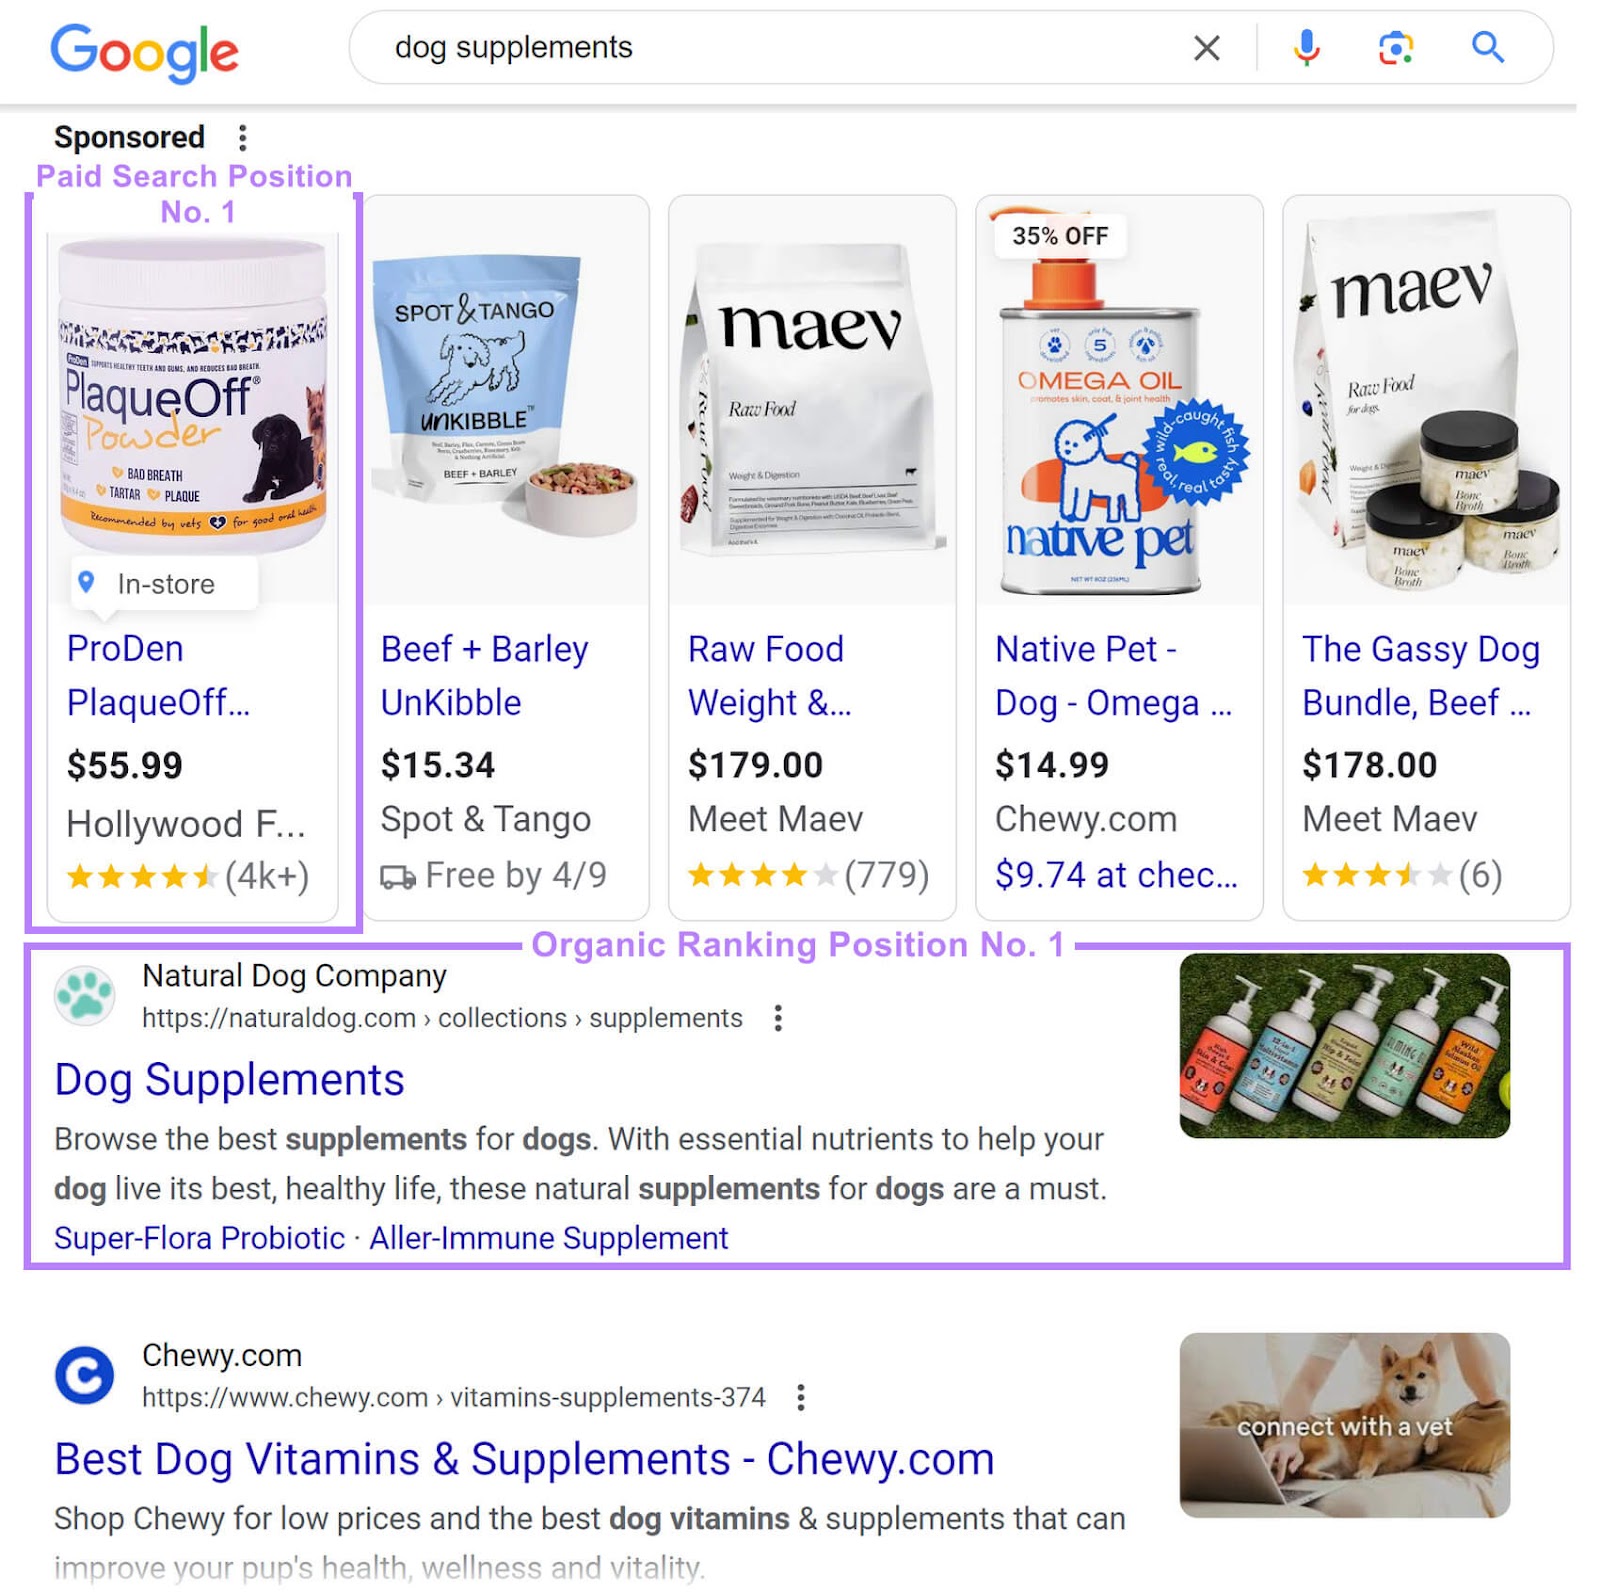 Hollywood Feed has the No. 1 paid search position with PPC ad, and Natural  Company has the No. 1 organic ranking position for " supplements"